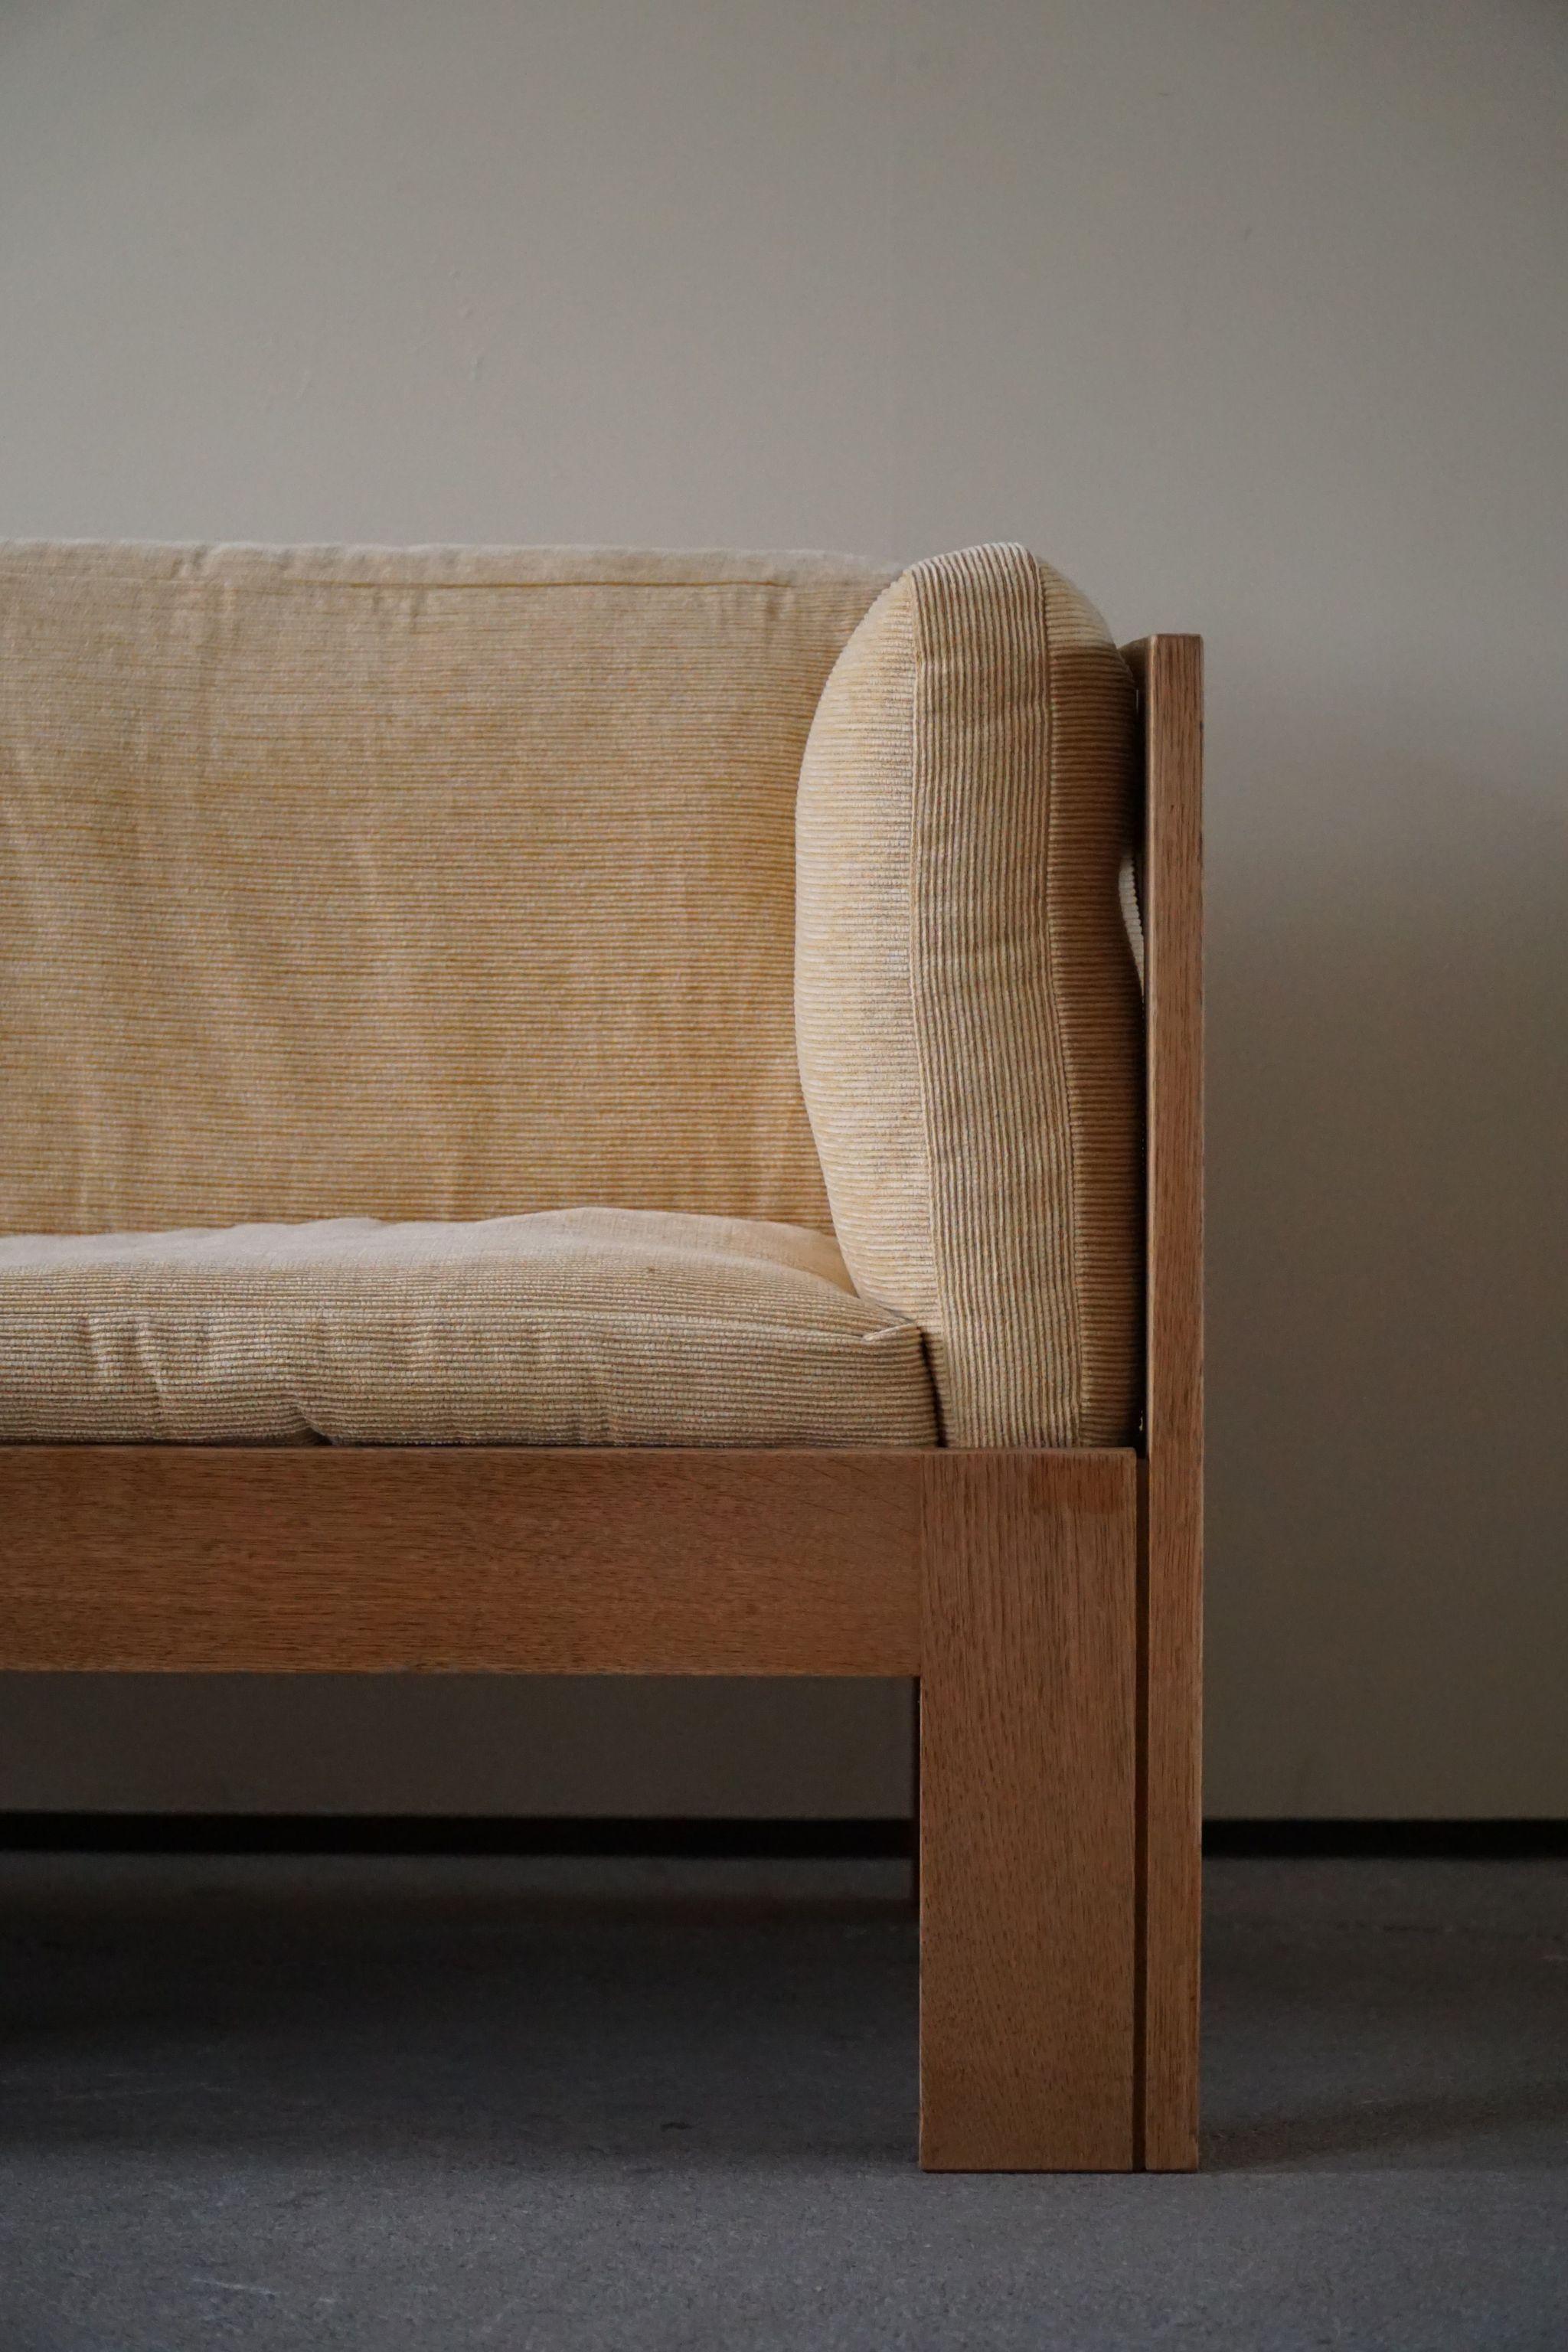 20th Century Danish Mid Century Sofa with Oak Frame, Reupholstered, by Tage Poulsen, 1960s